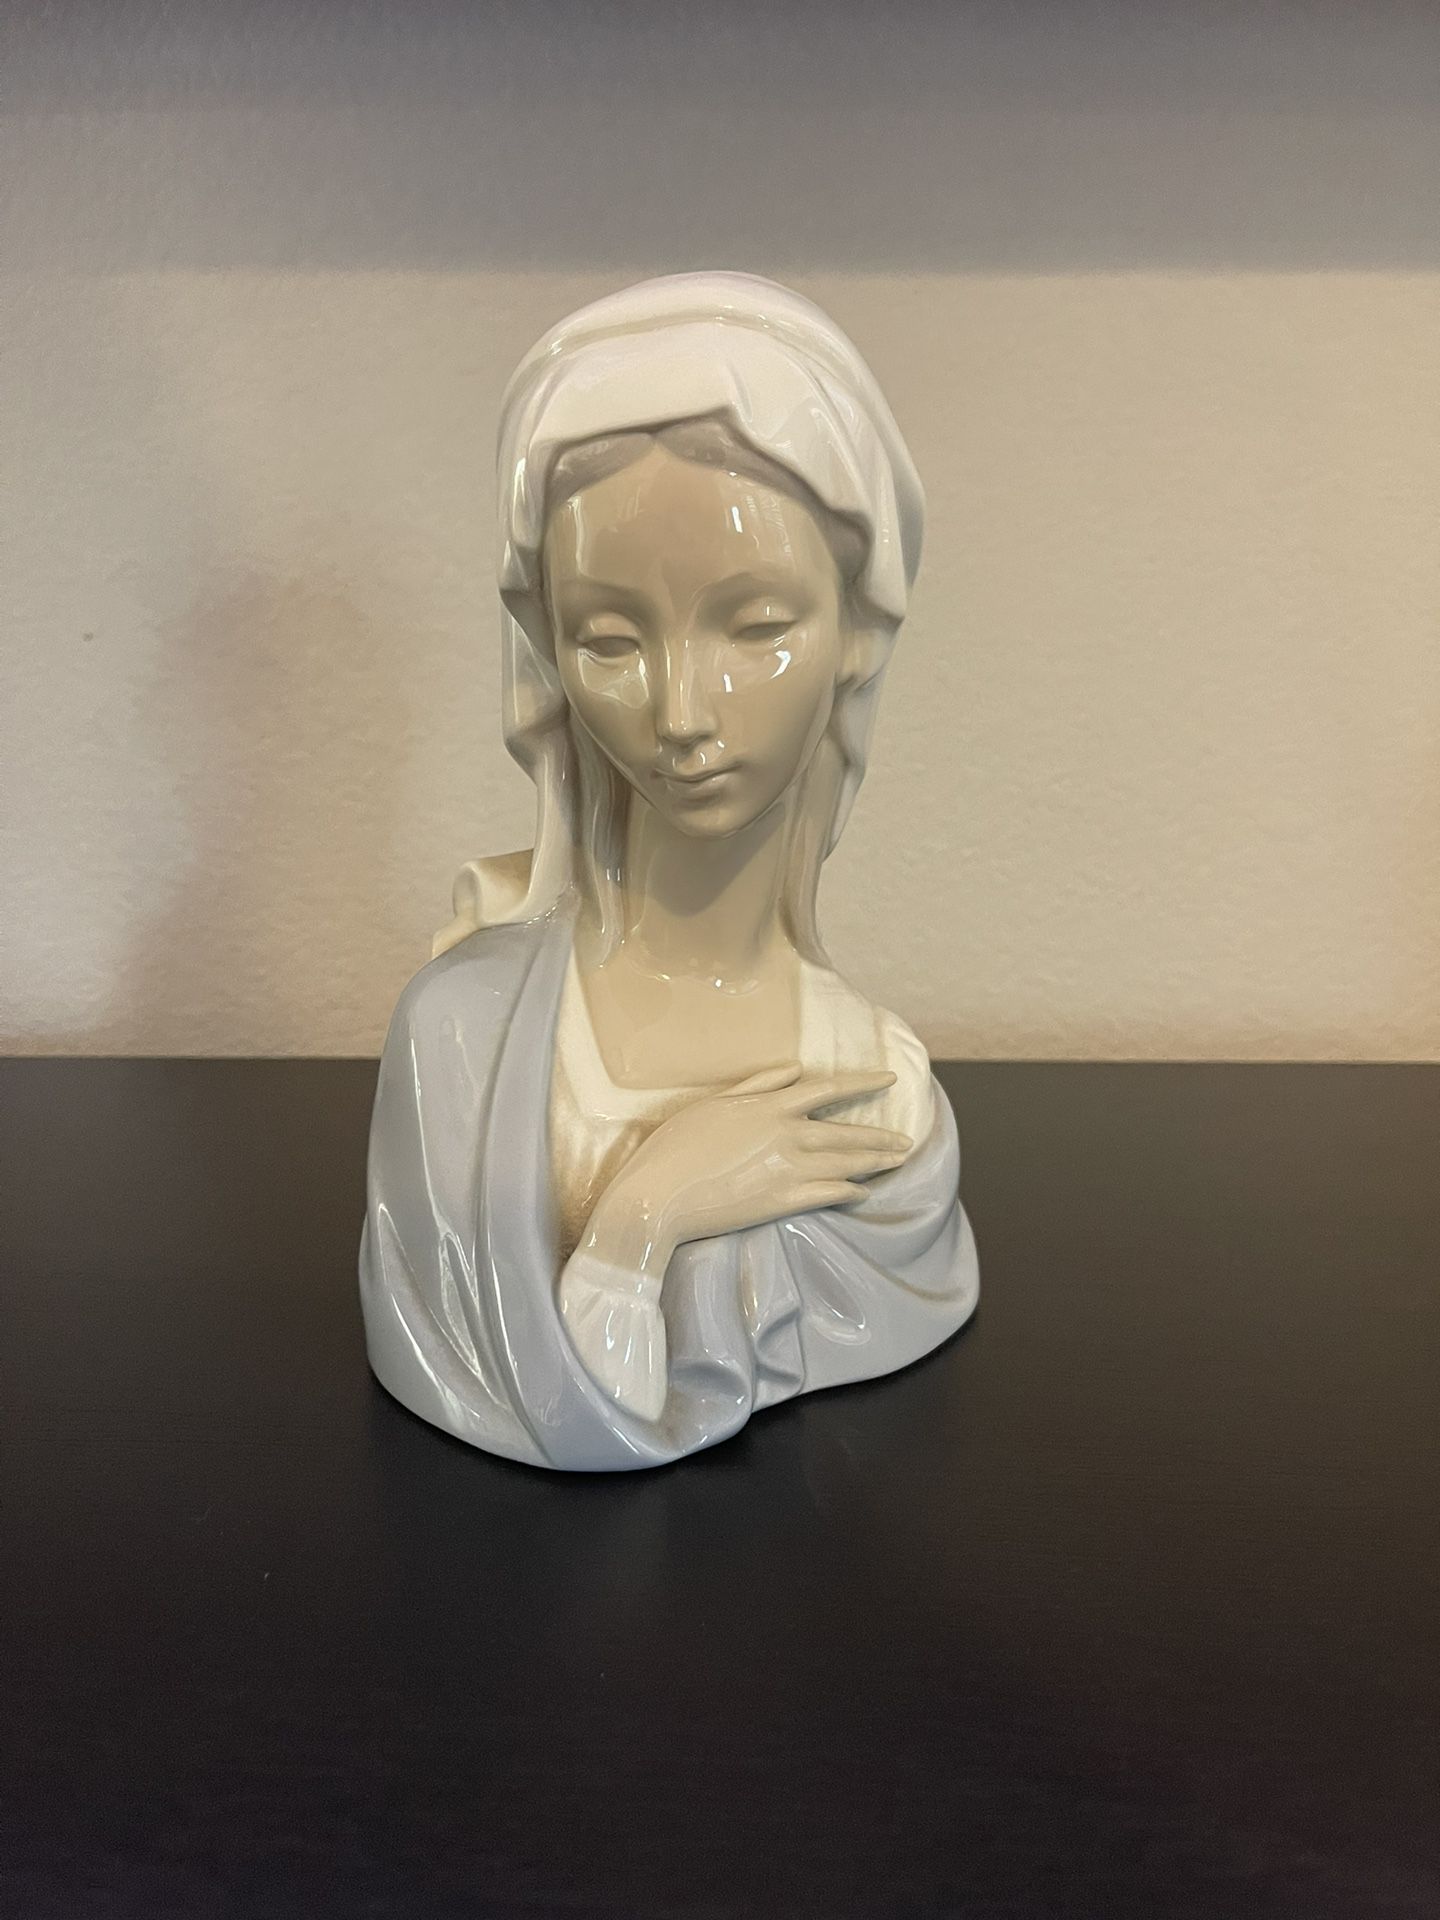 Rare Authentic Vintage Lladro Nativity Madonna Head Bust Virgin Mary with Hand on Heart Porcelain Figure